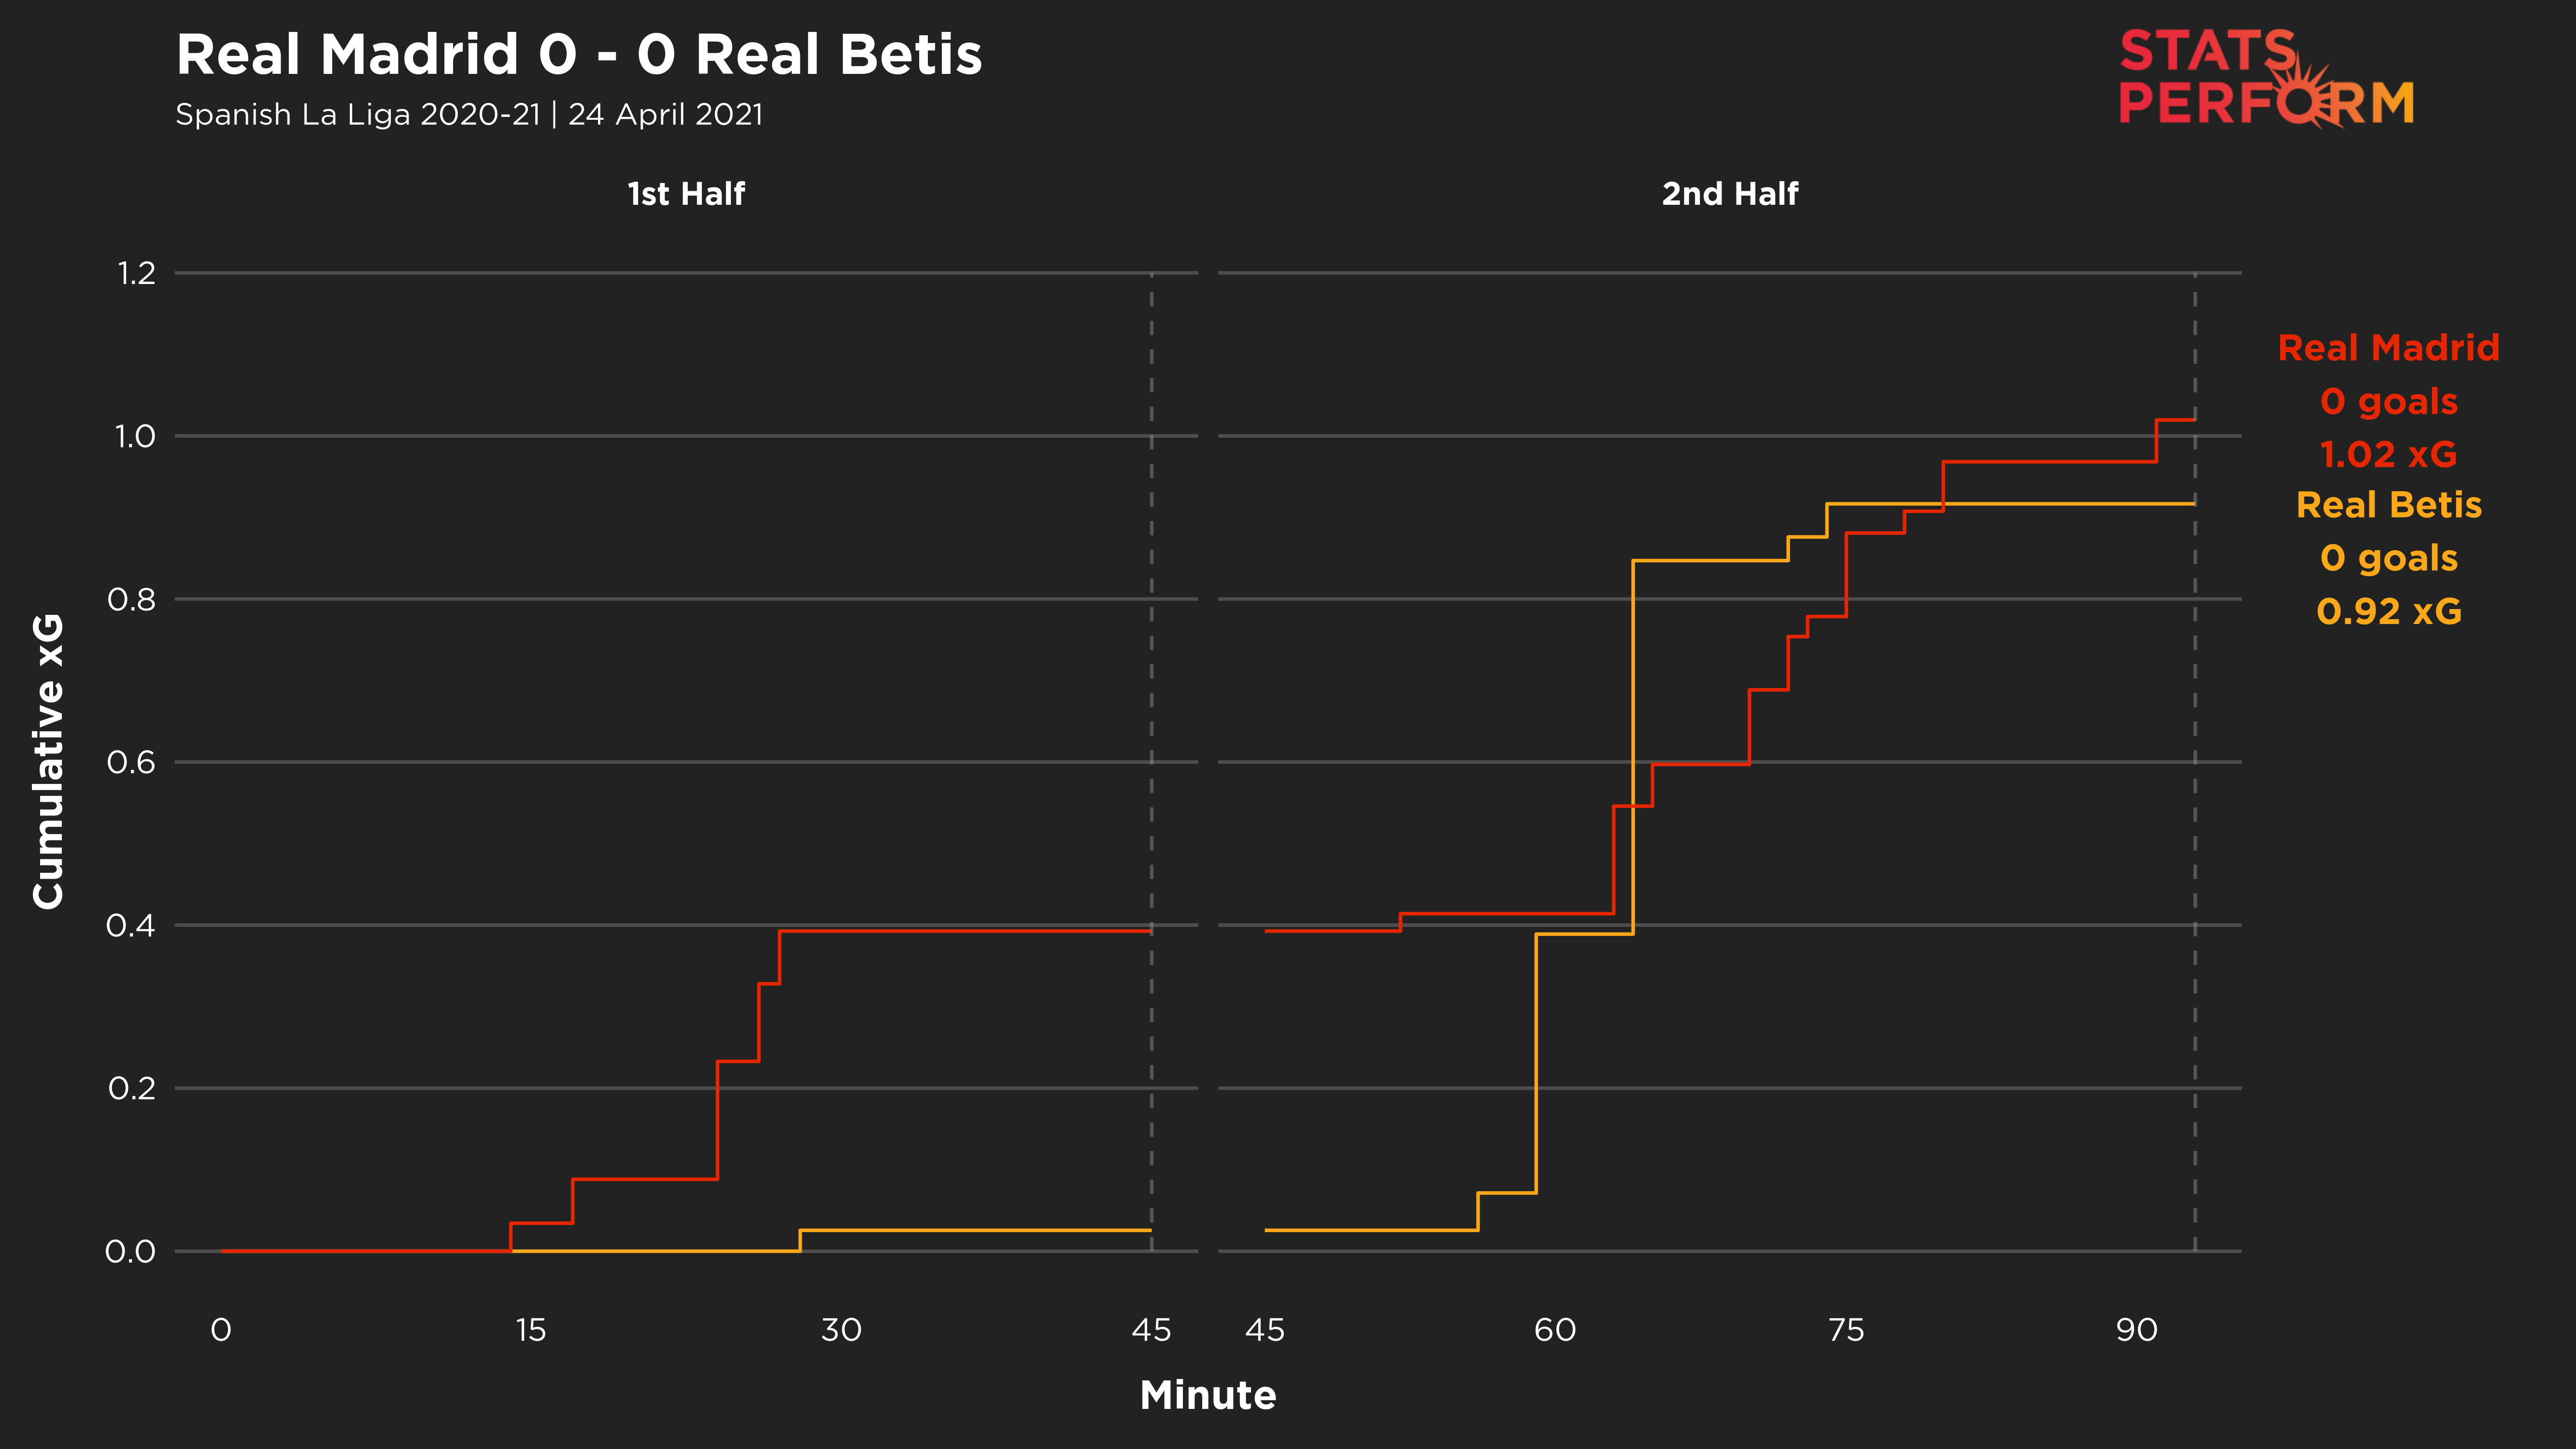 Real Madrid's cumulative xG value was only marginally better than Real Betis'